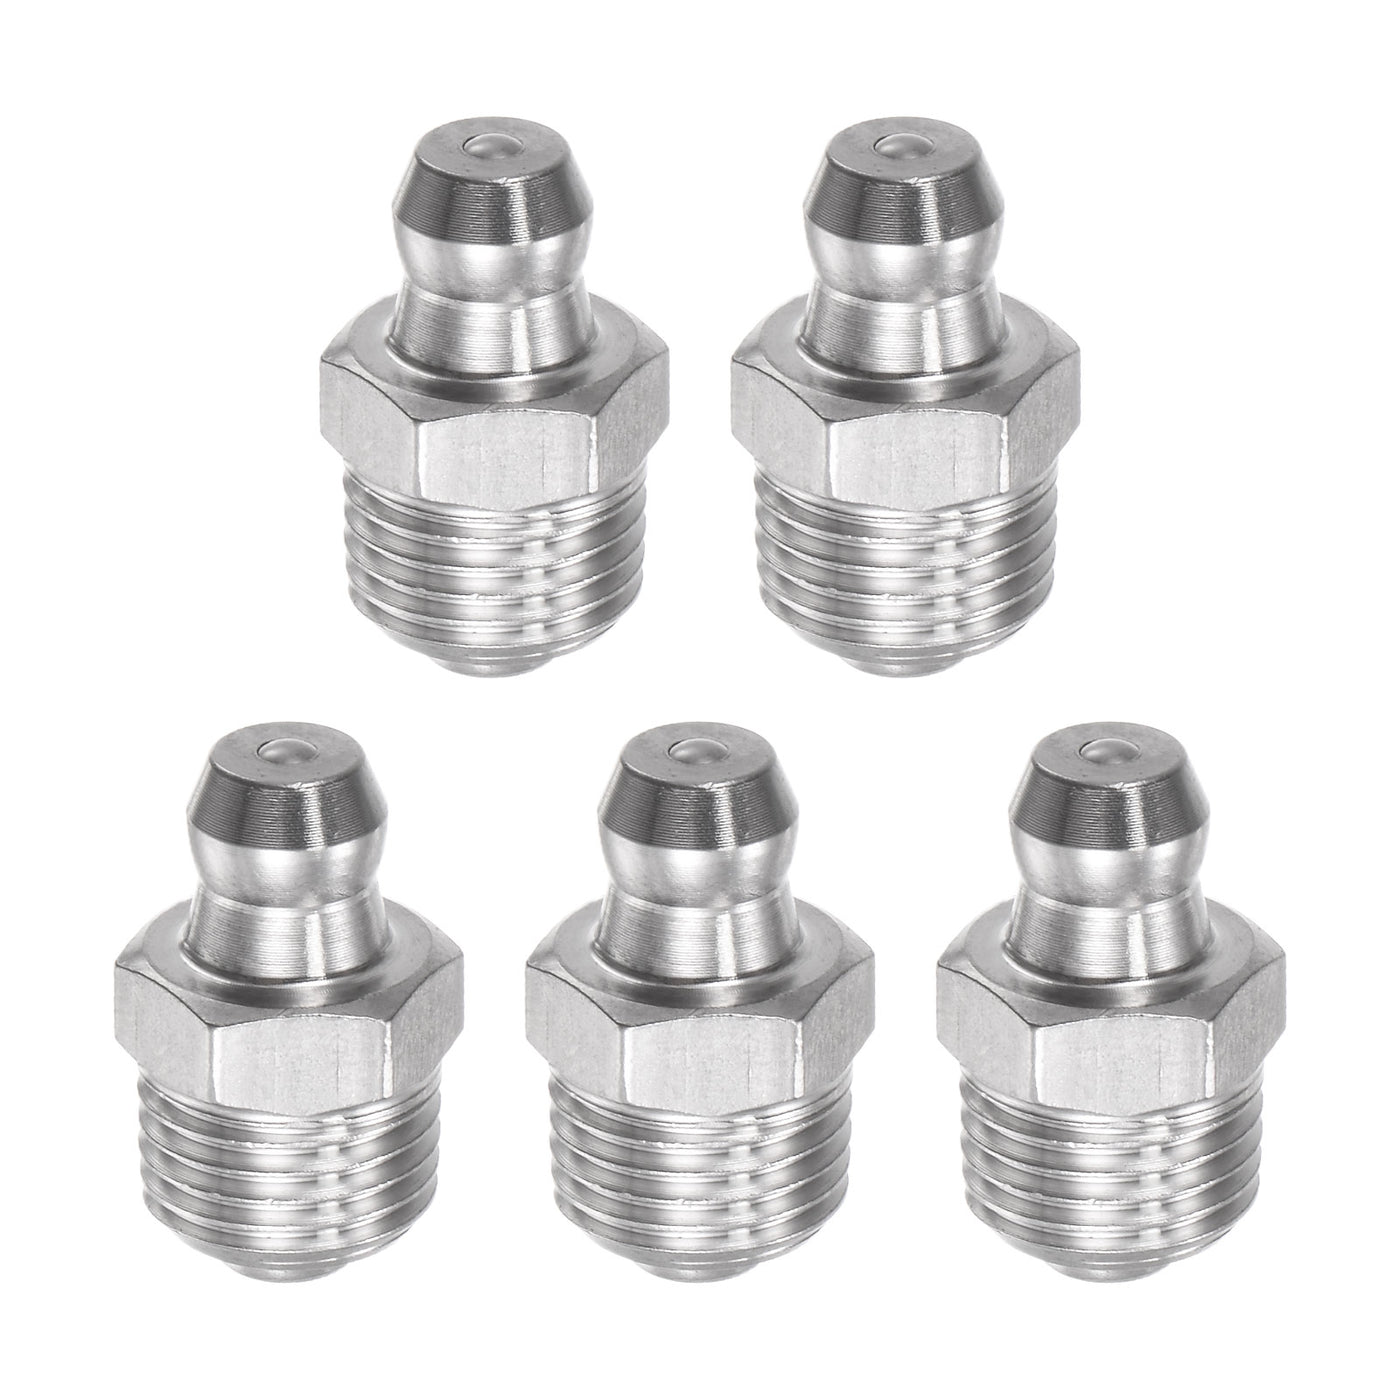 Uxcell Uxcell 201 Stainless Steel Straight Hydraulic Grease Fitting M6 x 1mm Thread, 5Pcs